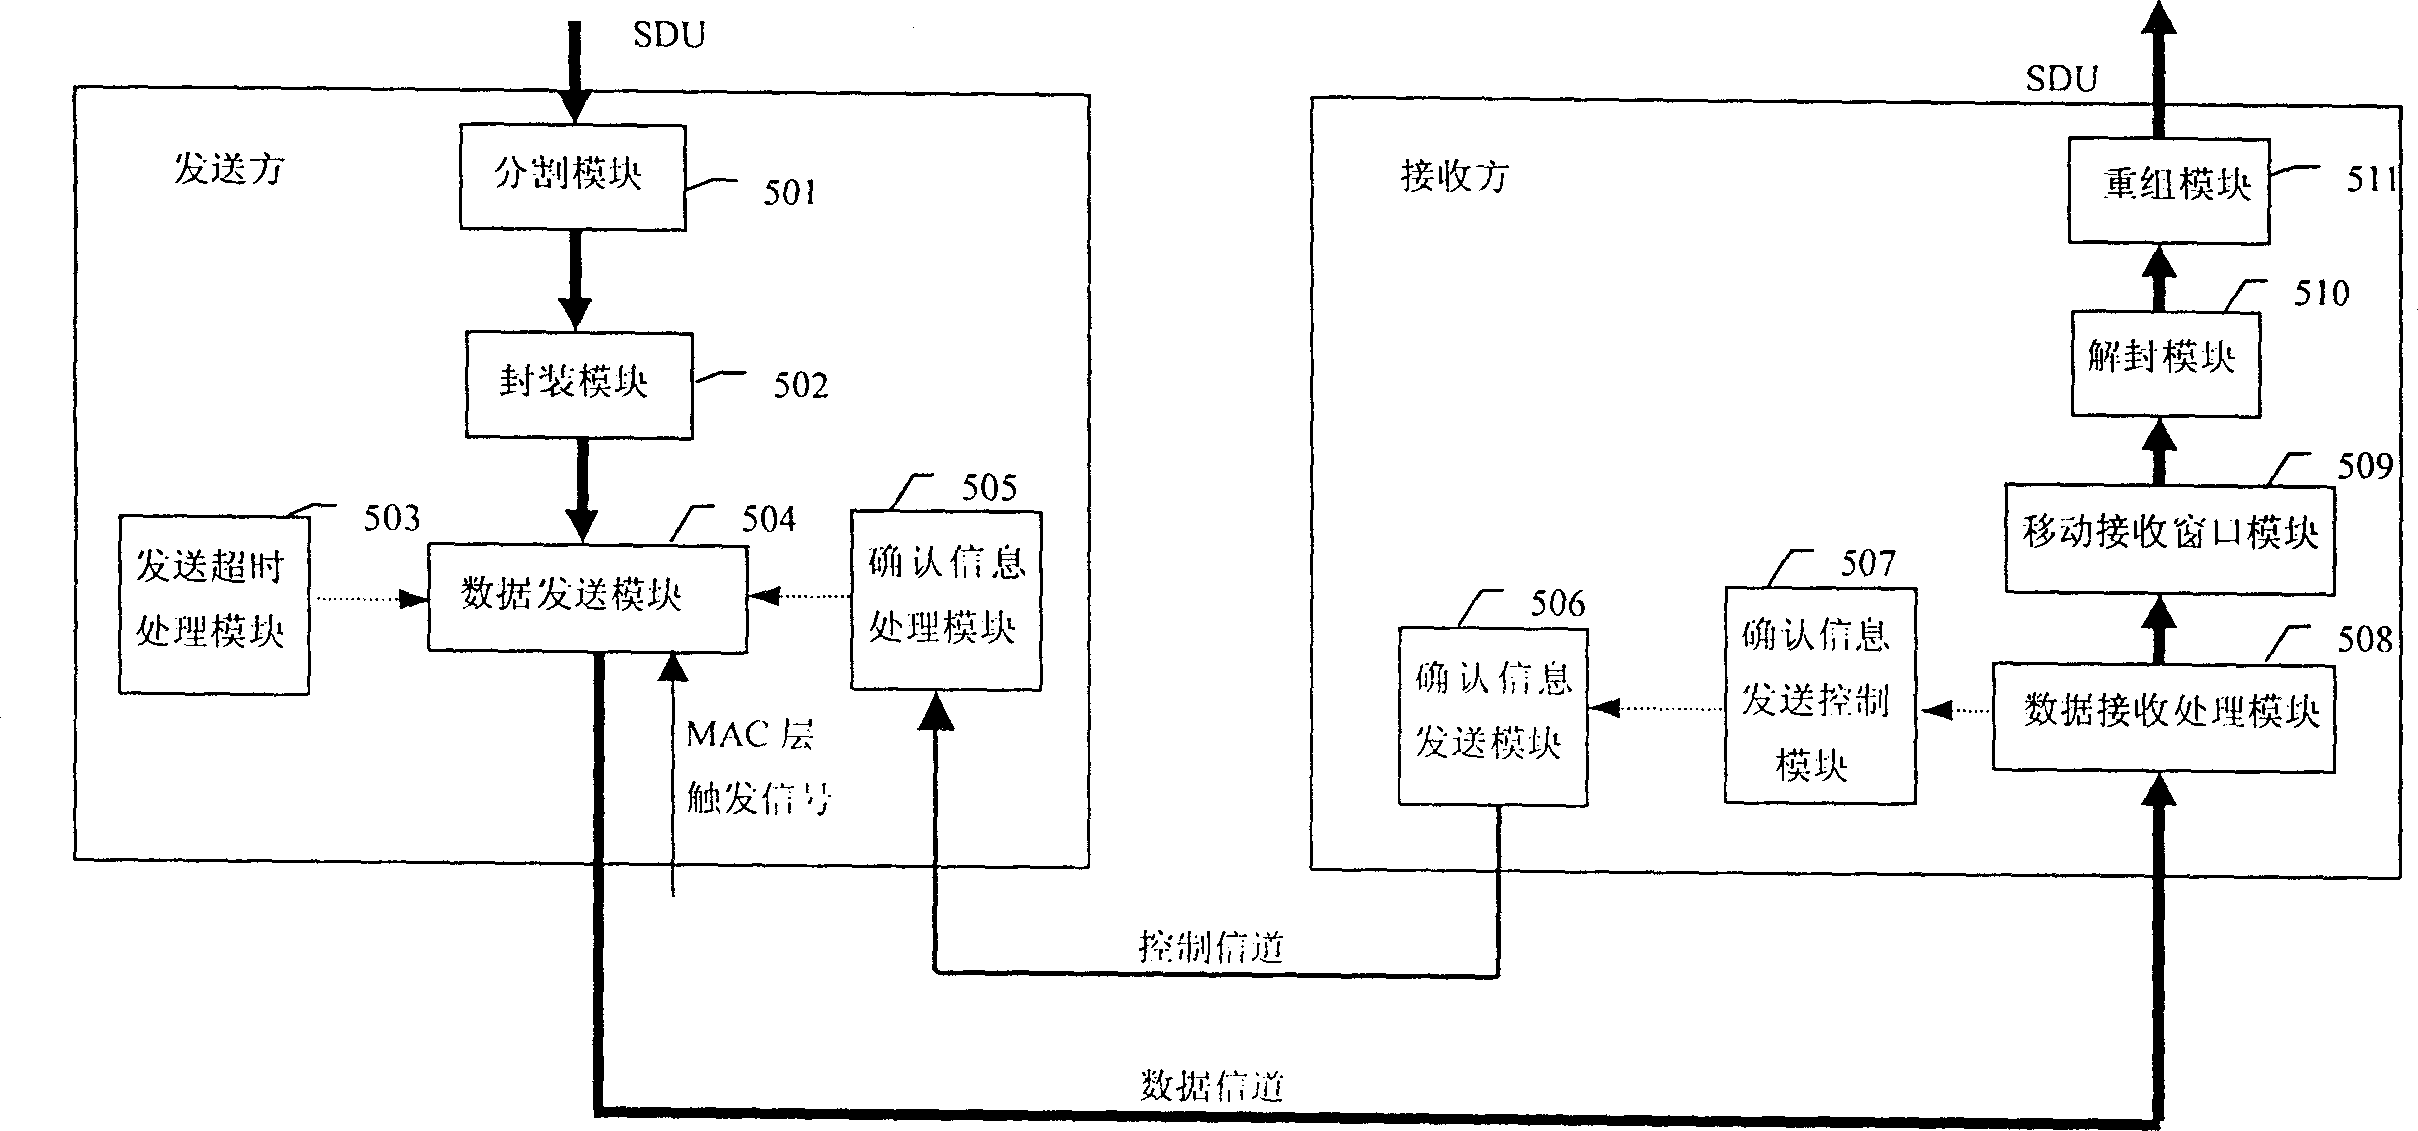 ARQ mechanism able to automatically request retransmissions for multiple rejections